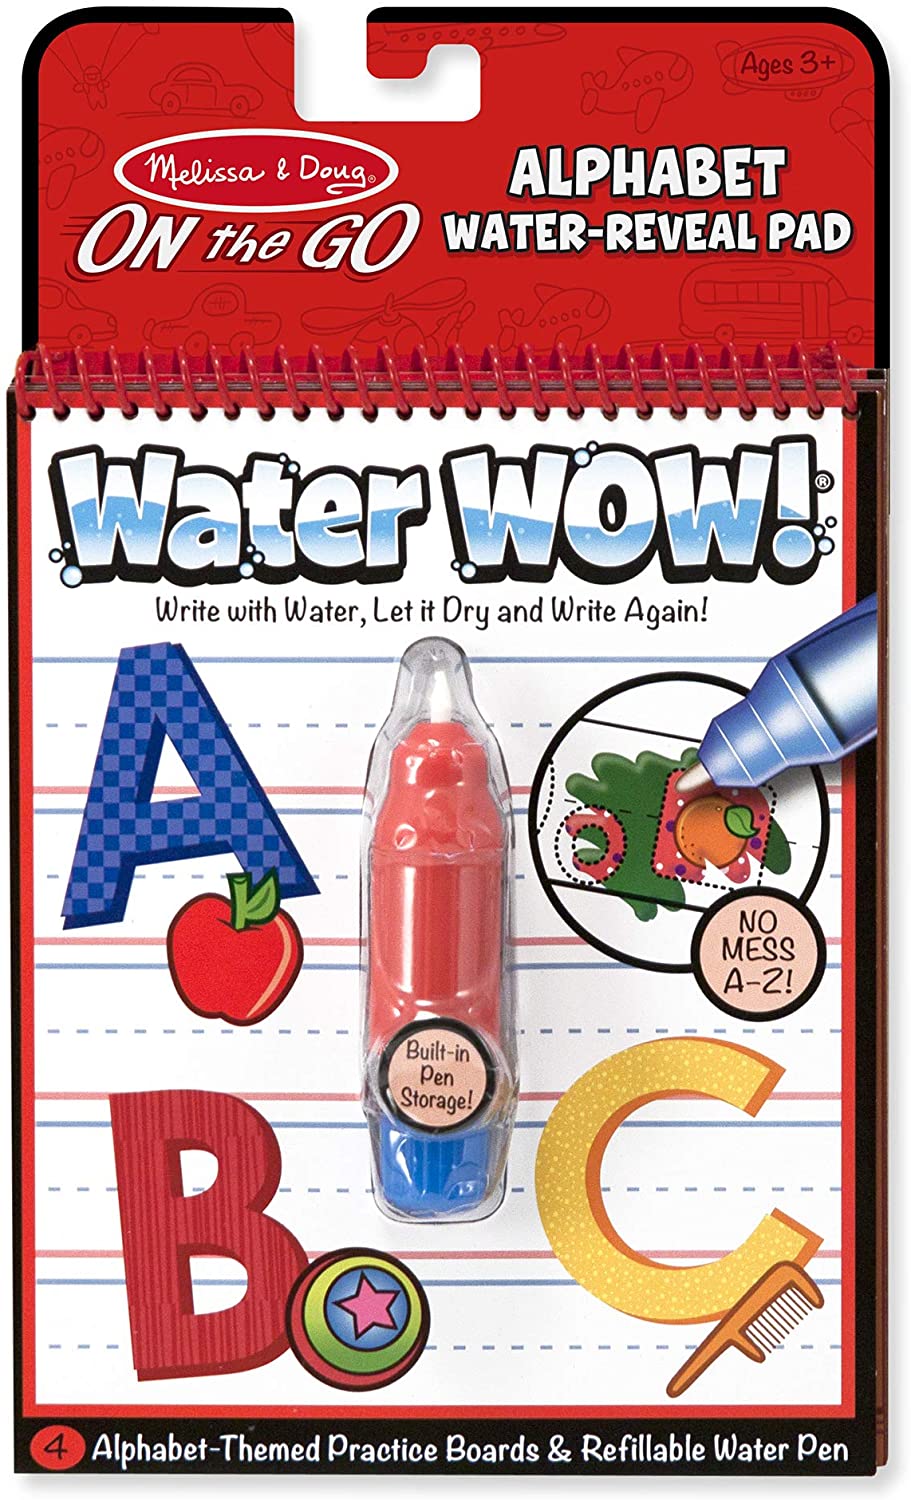 Letters Water Wow Book